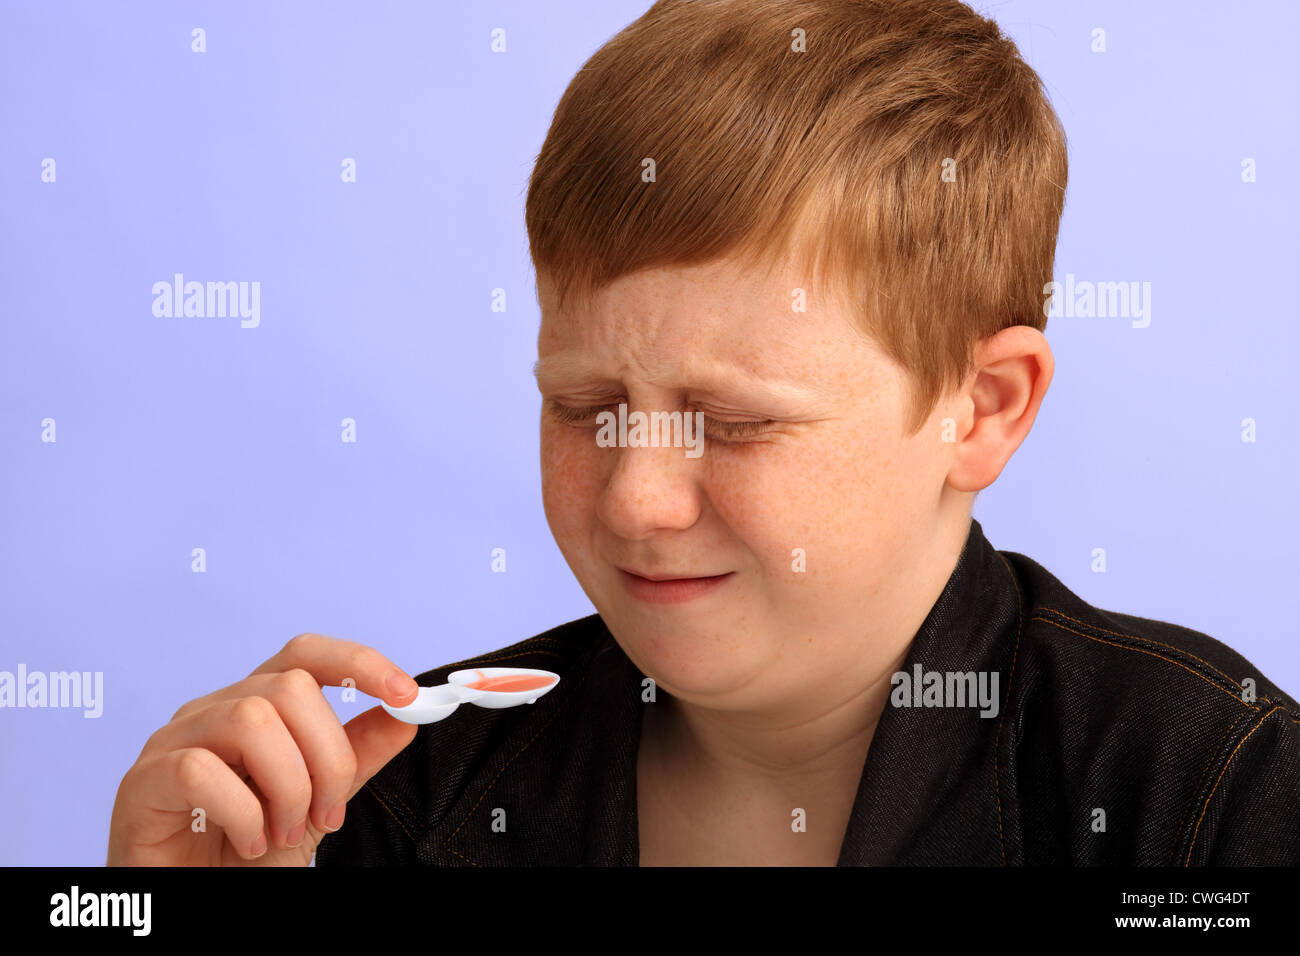 A 12 year old boy showing his dislike for the medicine he is about to take Stock Photo